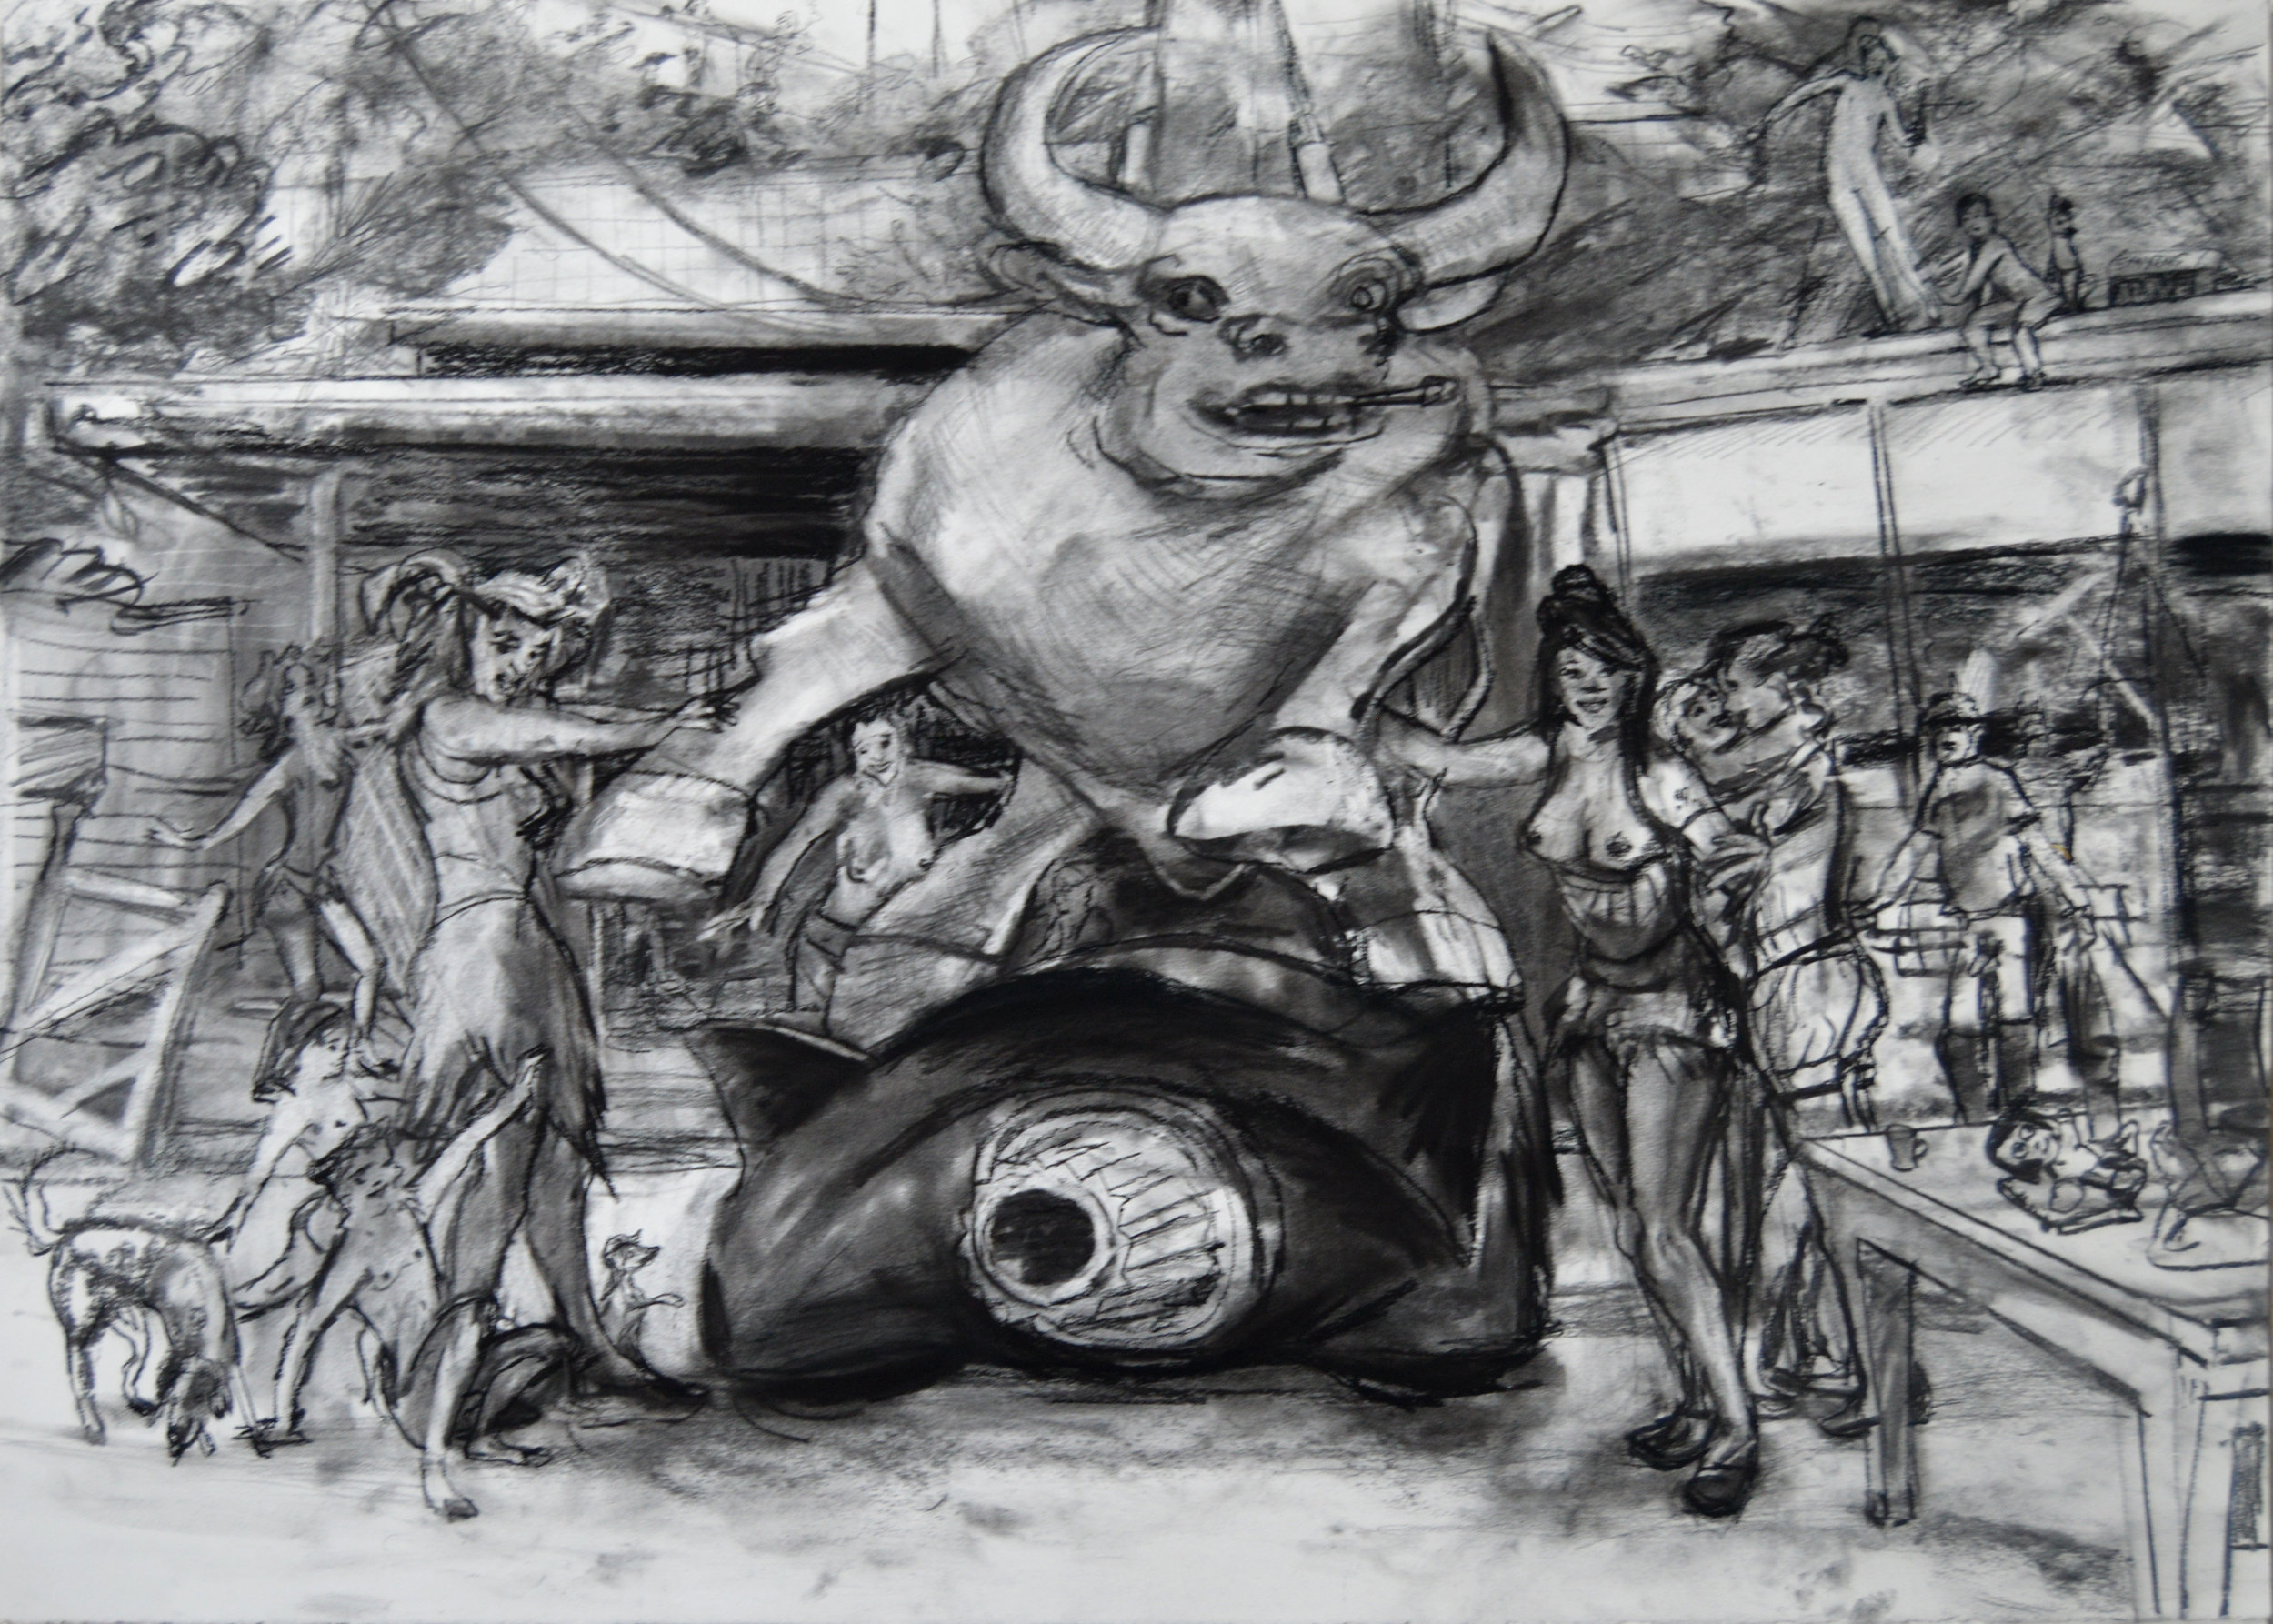 Yonkers charcoal 28 by 40 inches 2016.jpg